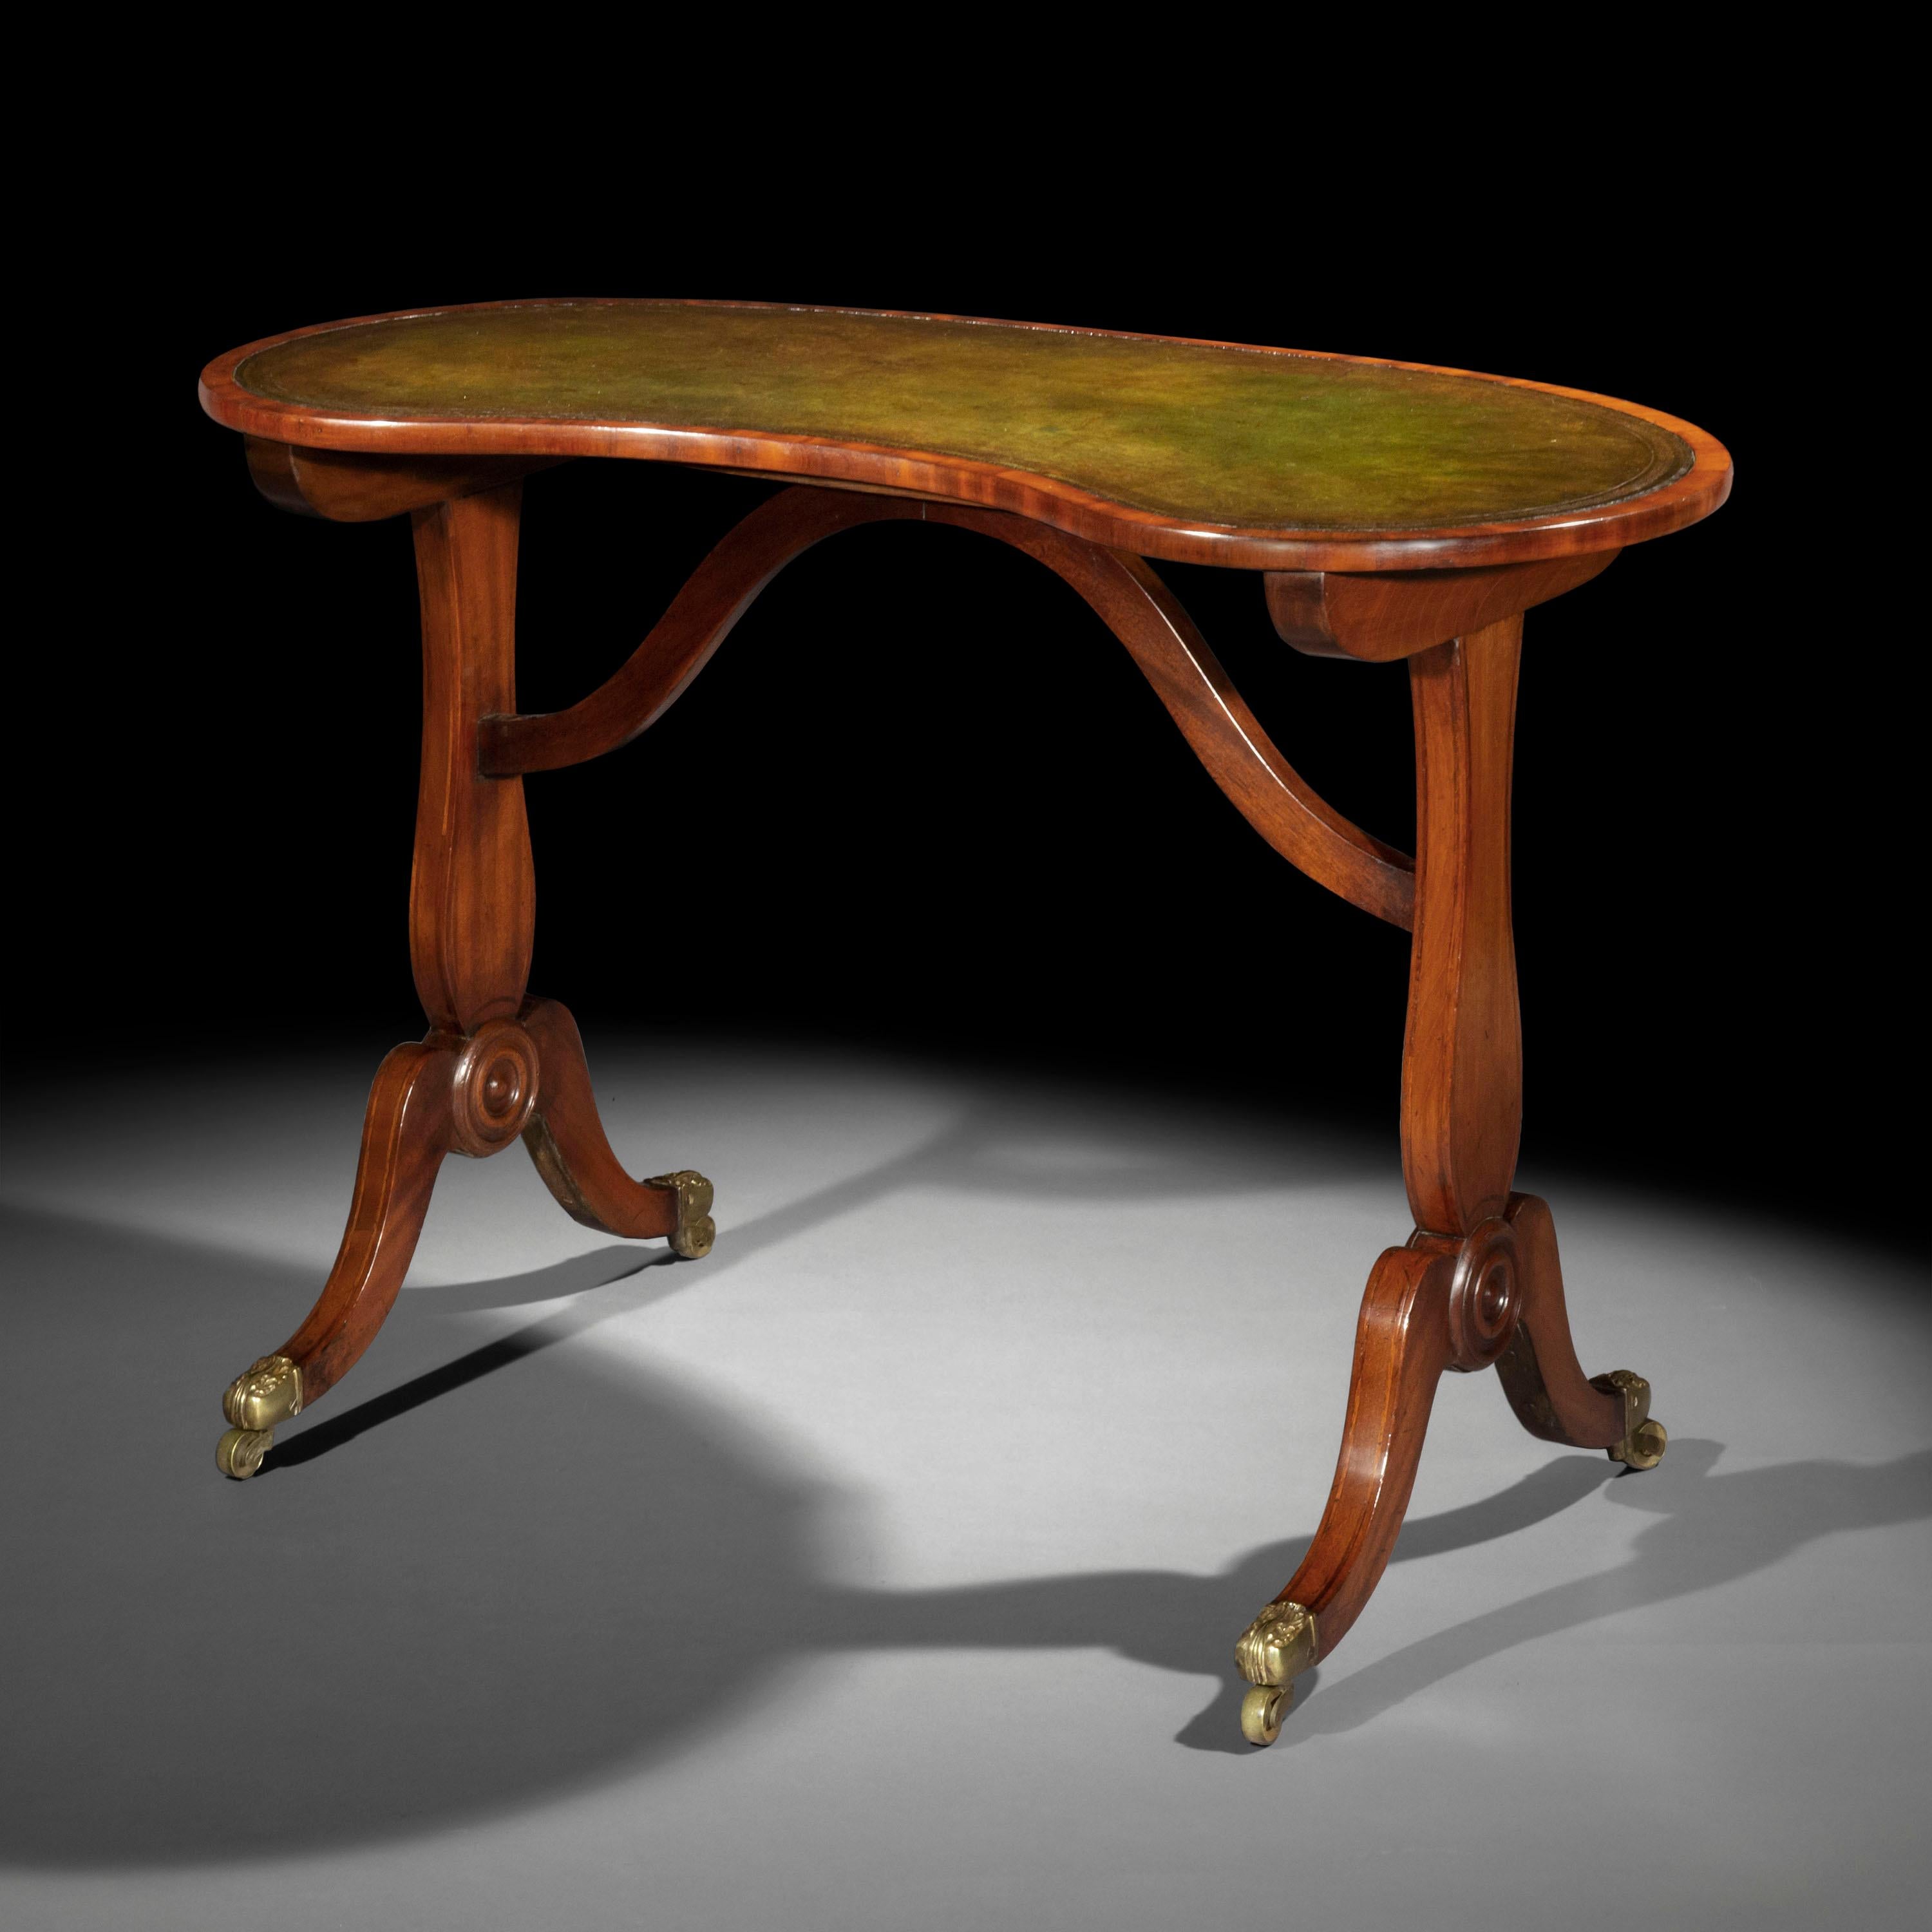 An unusual early 19th century writing table of 'kidney' shape, with patinated green leather-inset top.

English, circa 1810.

Elegantly understated, this table is useful and versatile with its tooled leather top and slender supports.

Two similar